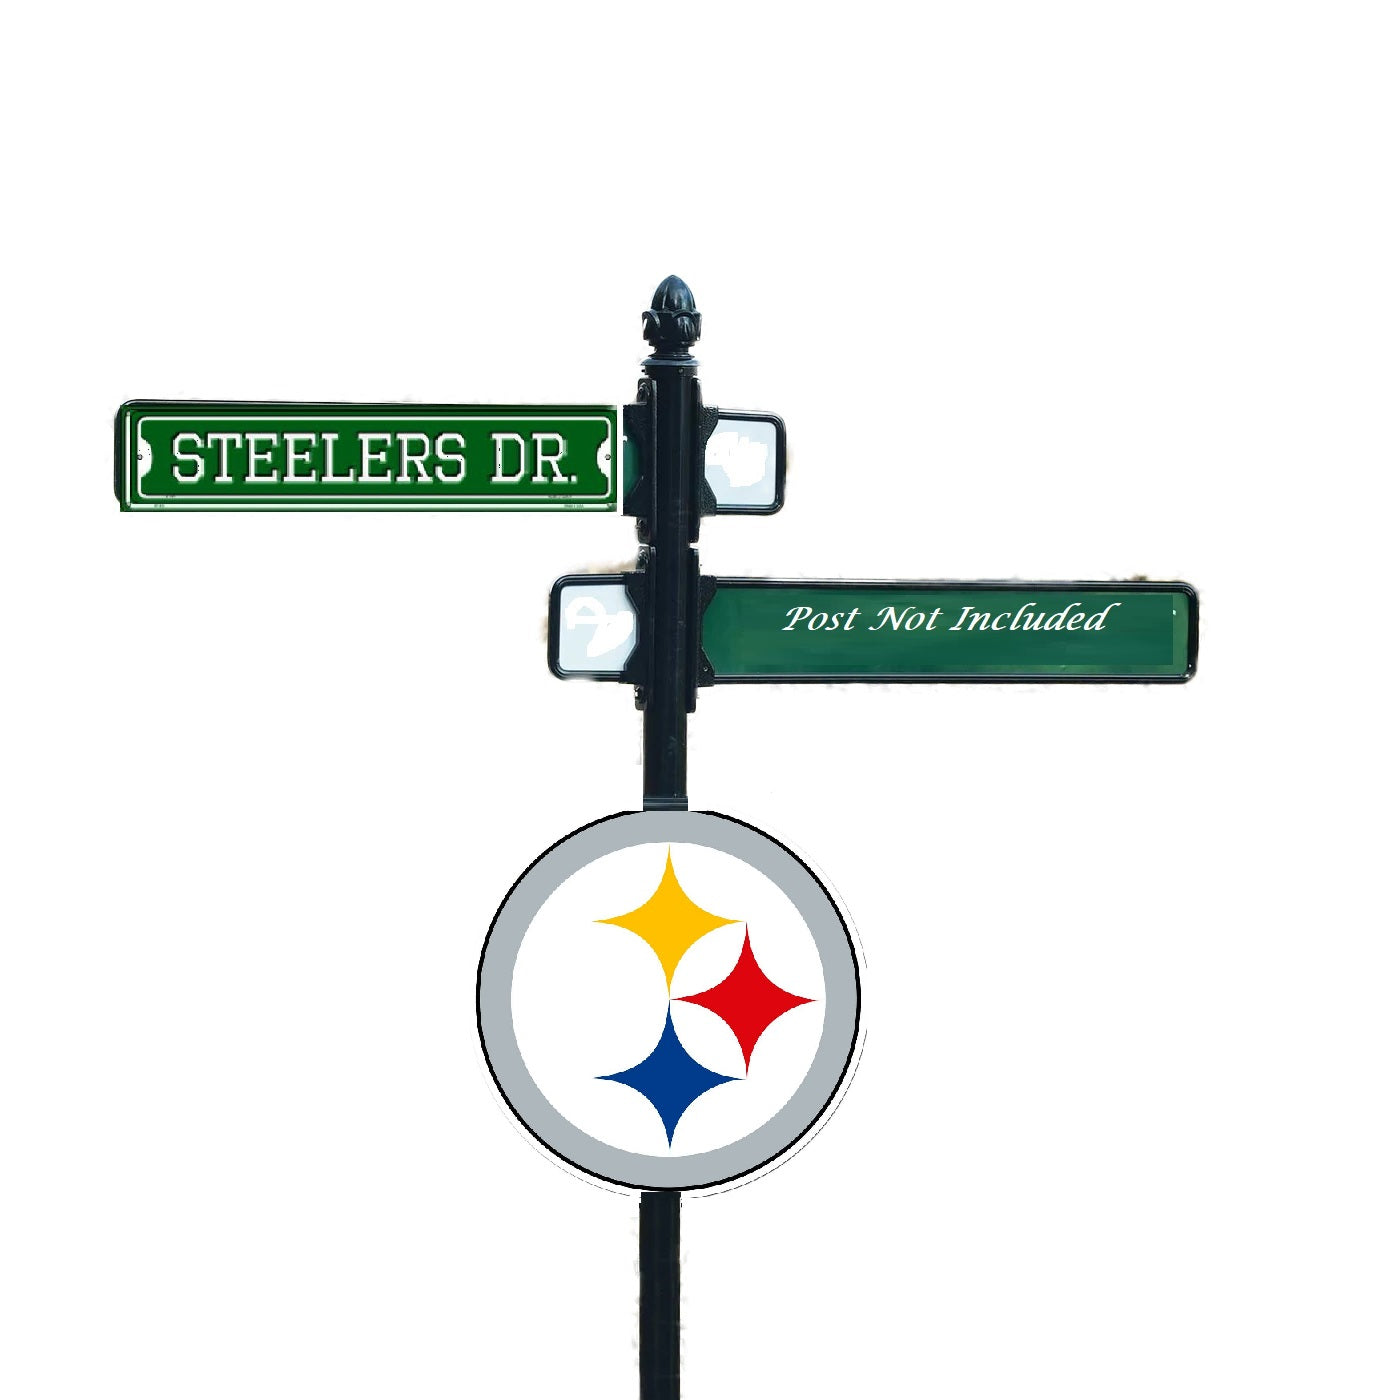 Steelers Drive Street Sign Post